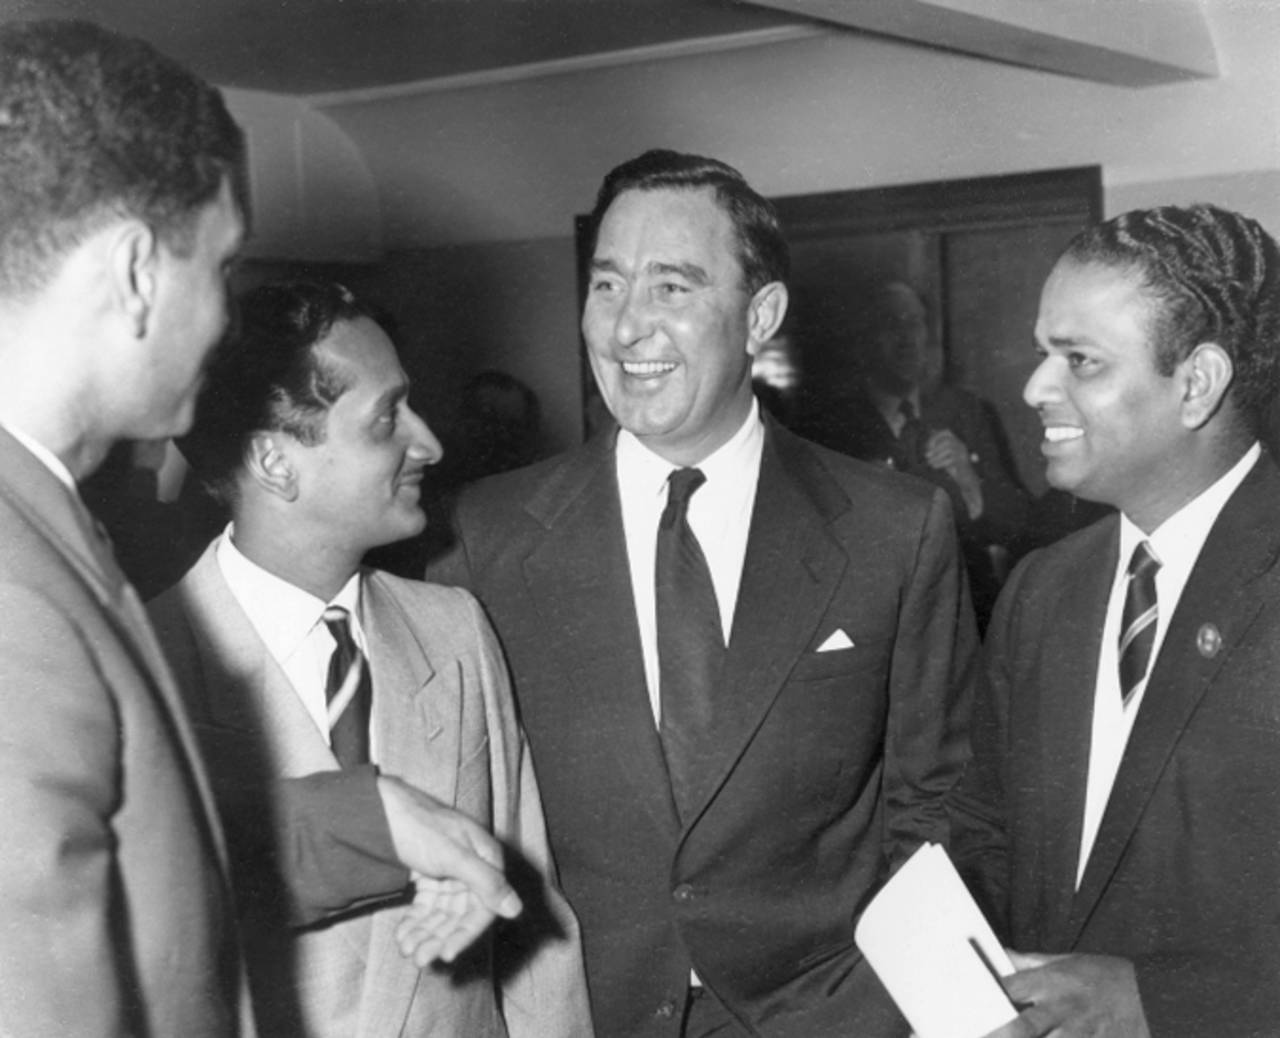 "Fancy a game of pass the captaincy, chaps?" - Polly Umrigar, Dattu Gaekwad, Denis Compton and Vijay Manjrekar have a chat during India's tour to England in 1959&nbsp;&nbsp;&bull;&nbsp;&nbsp;Getty Images